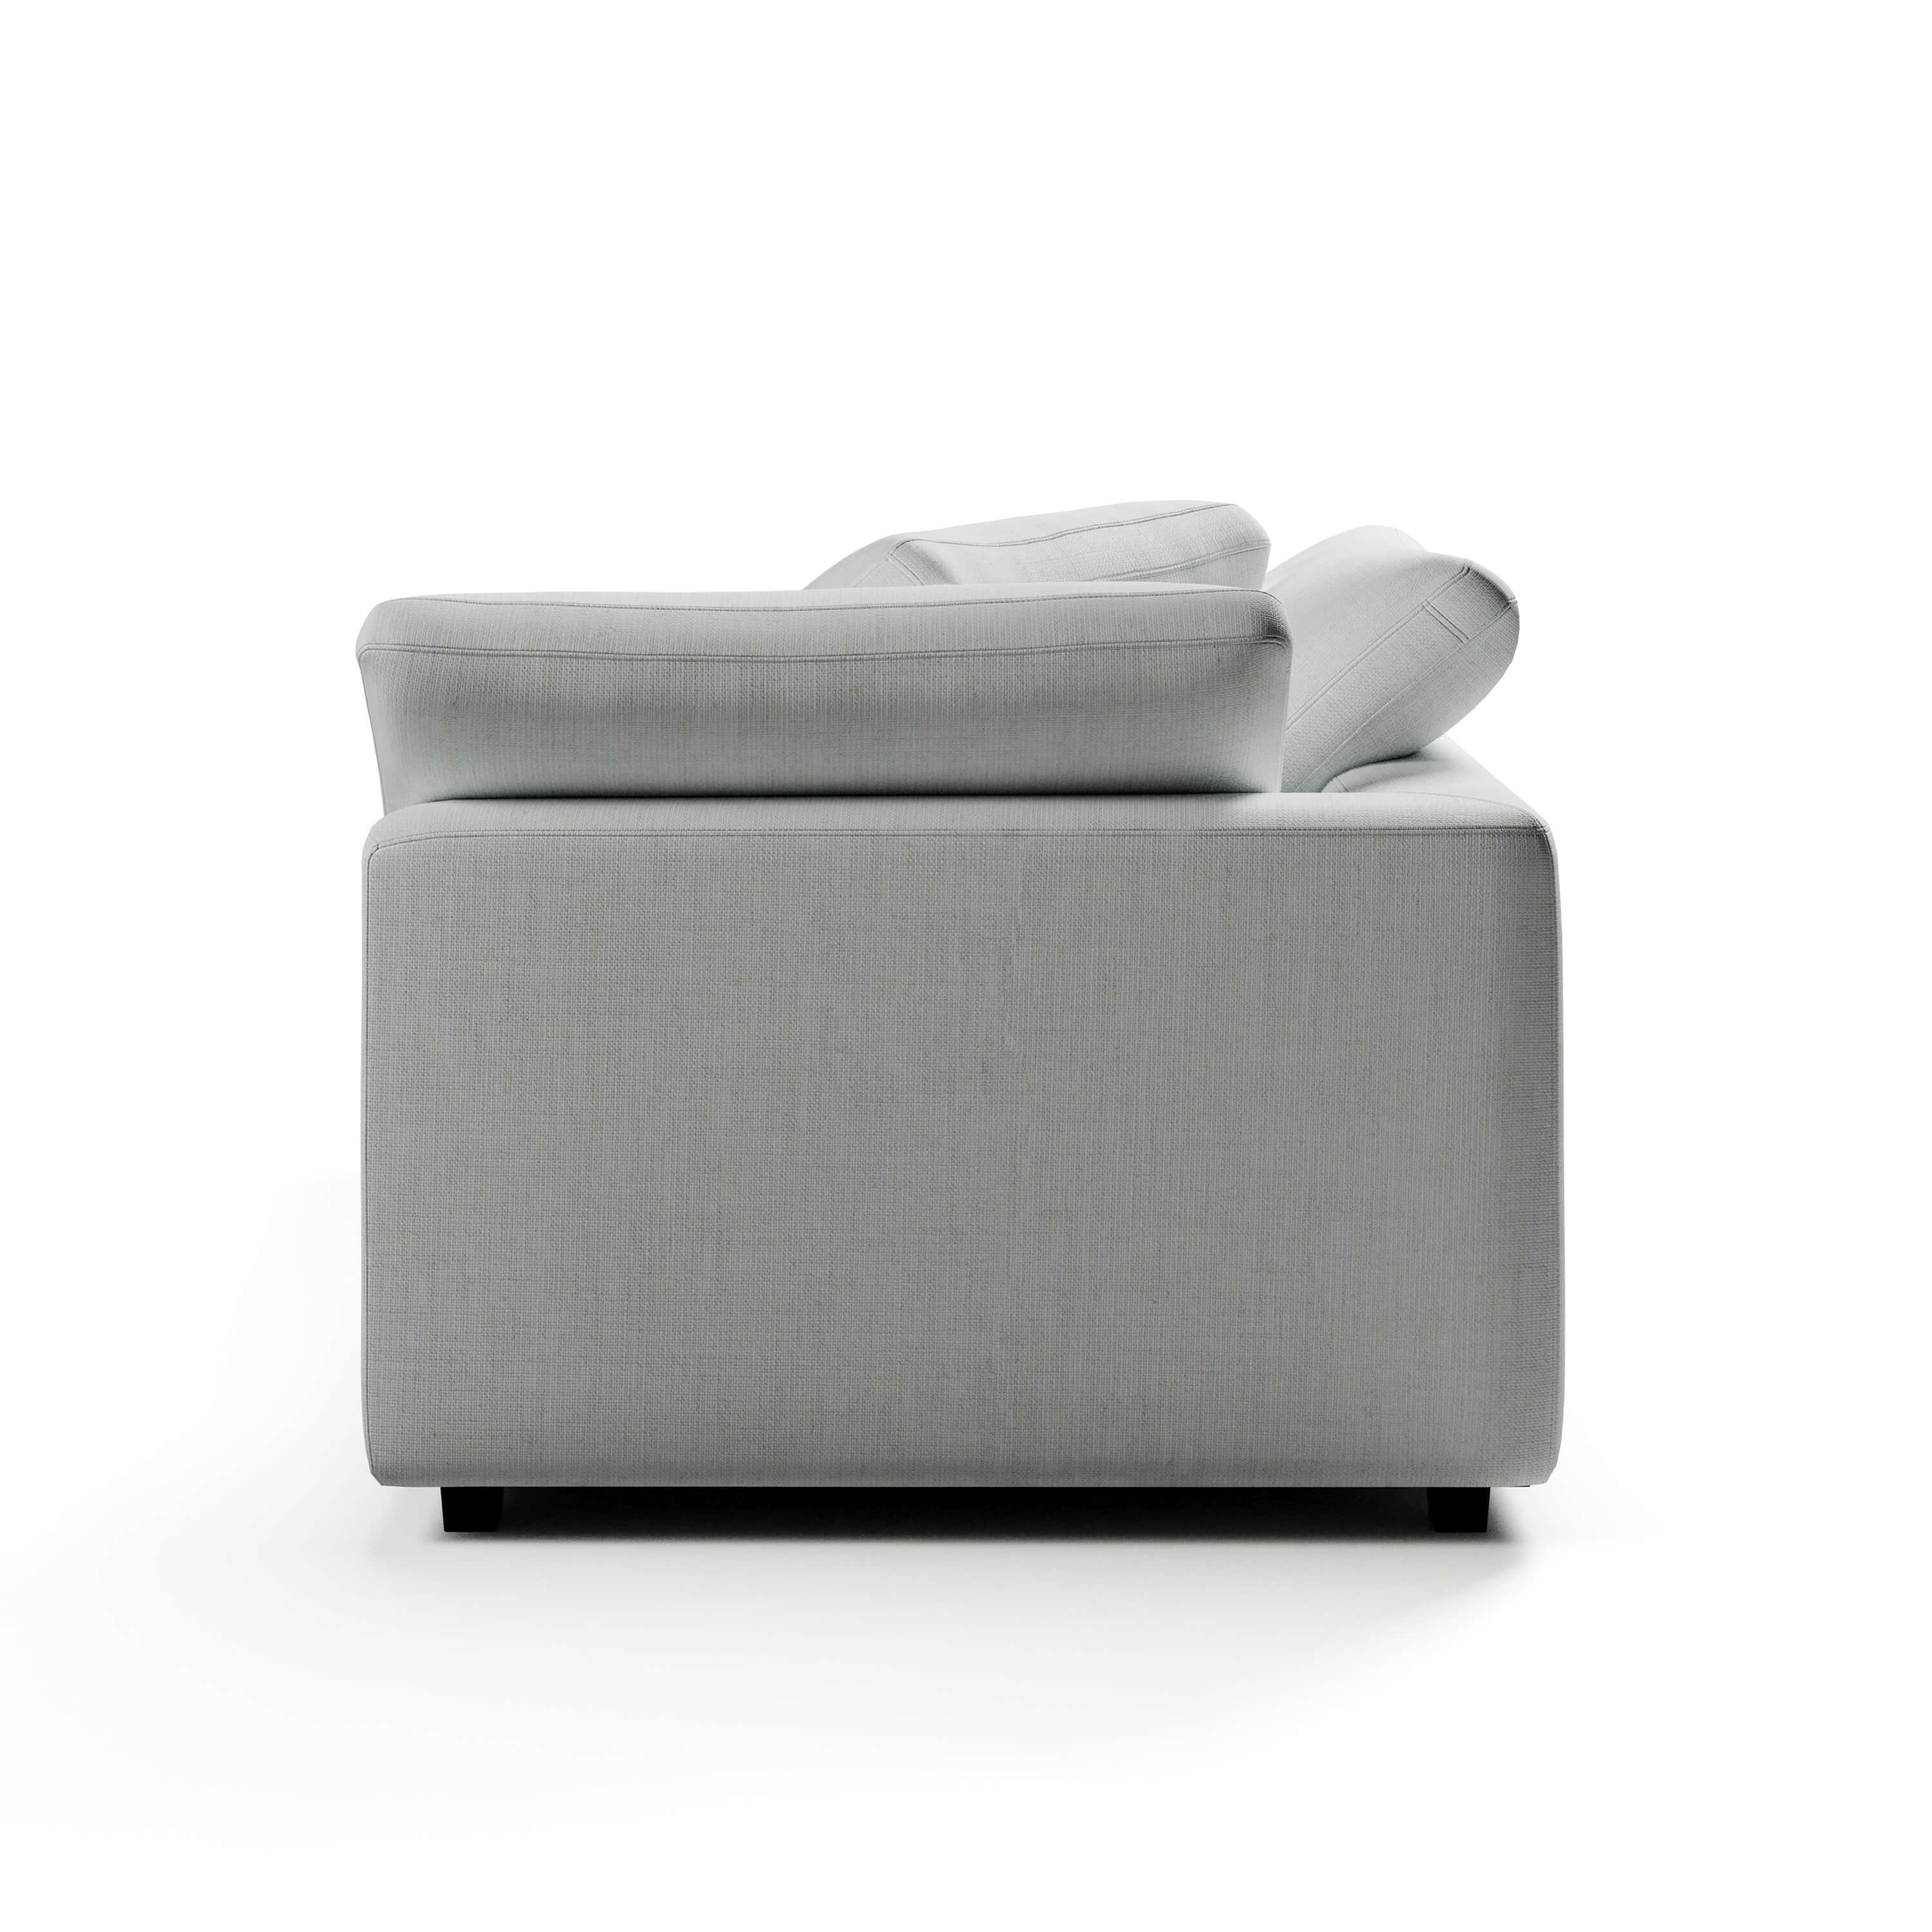 Left Arm Chaise Lounge | White Chaise Lounge Left | Couch Haus